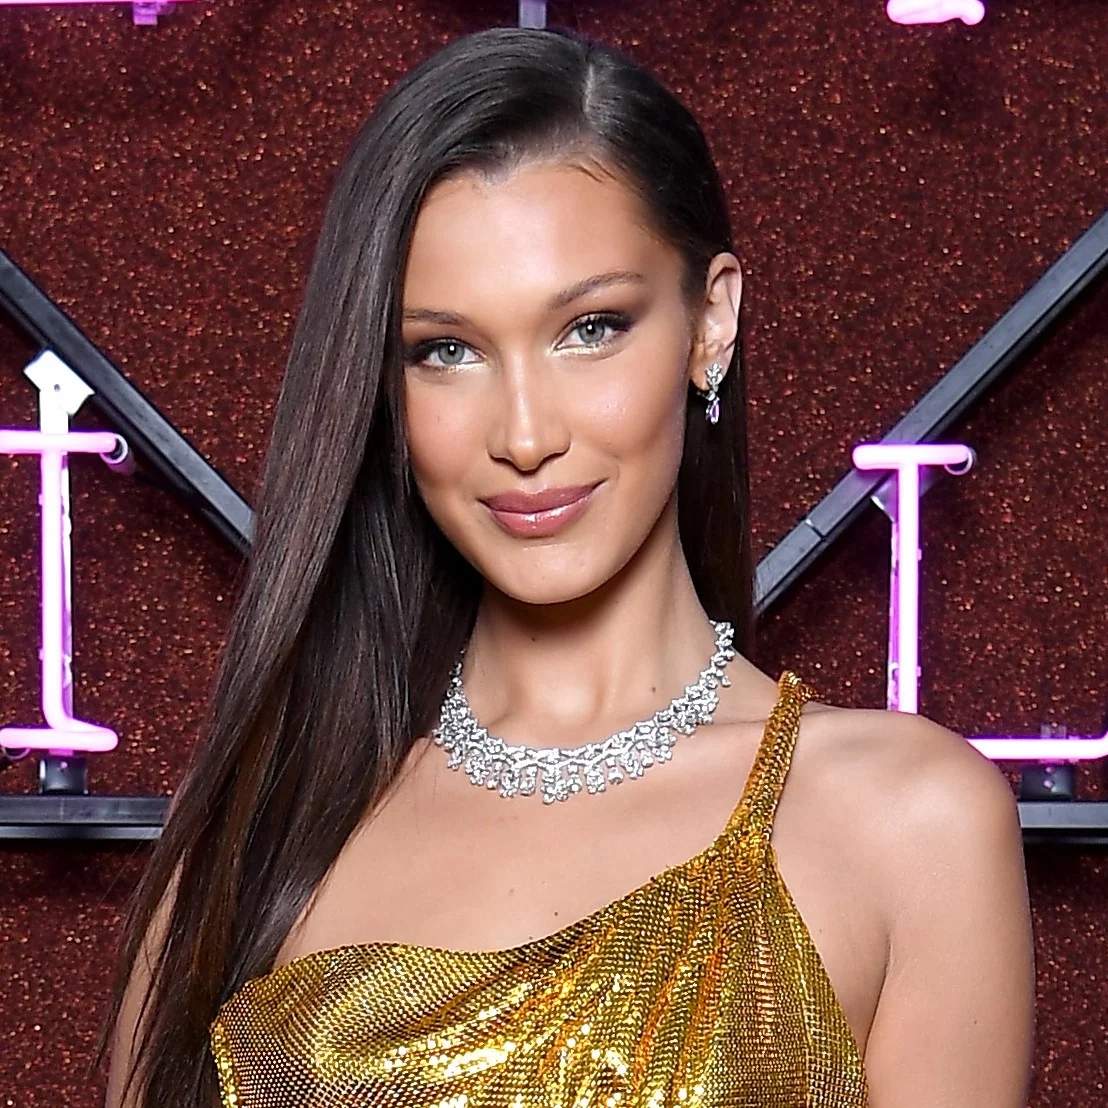 Bella Hadid Net Worth - A Supermodel With Many Talents